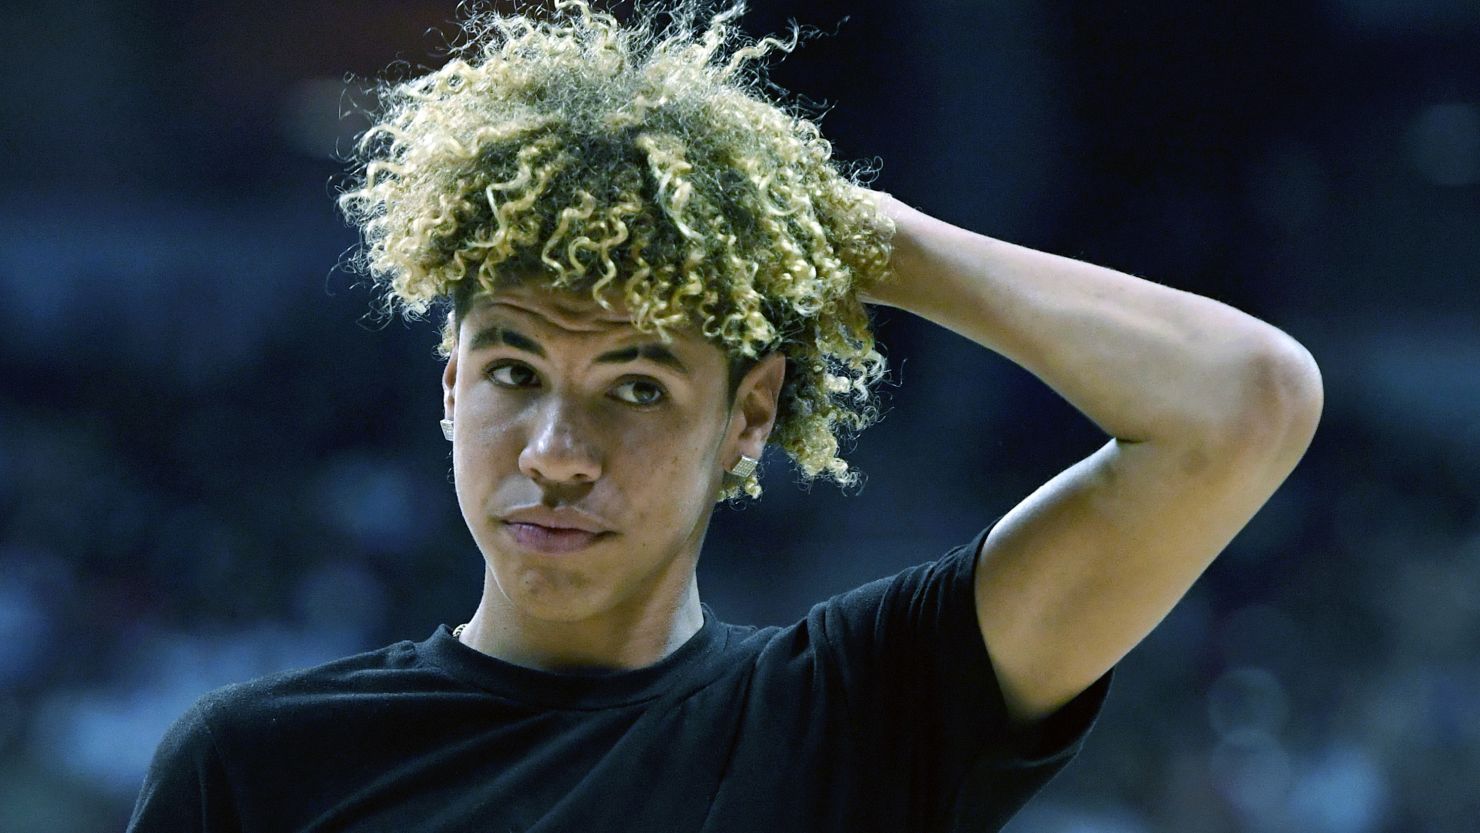 lamelo-ball-faces-backlash-for-laughing-on-bench-during-blowout-loss